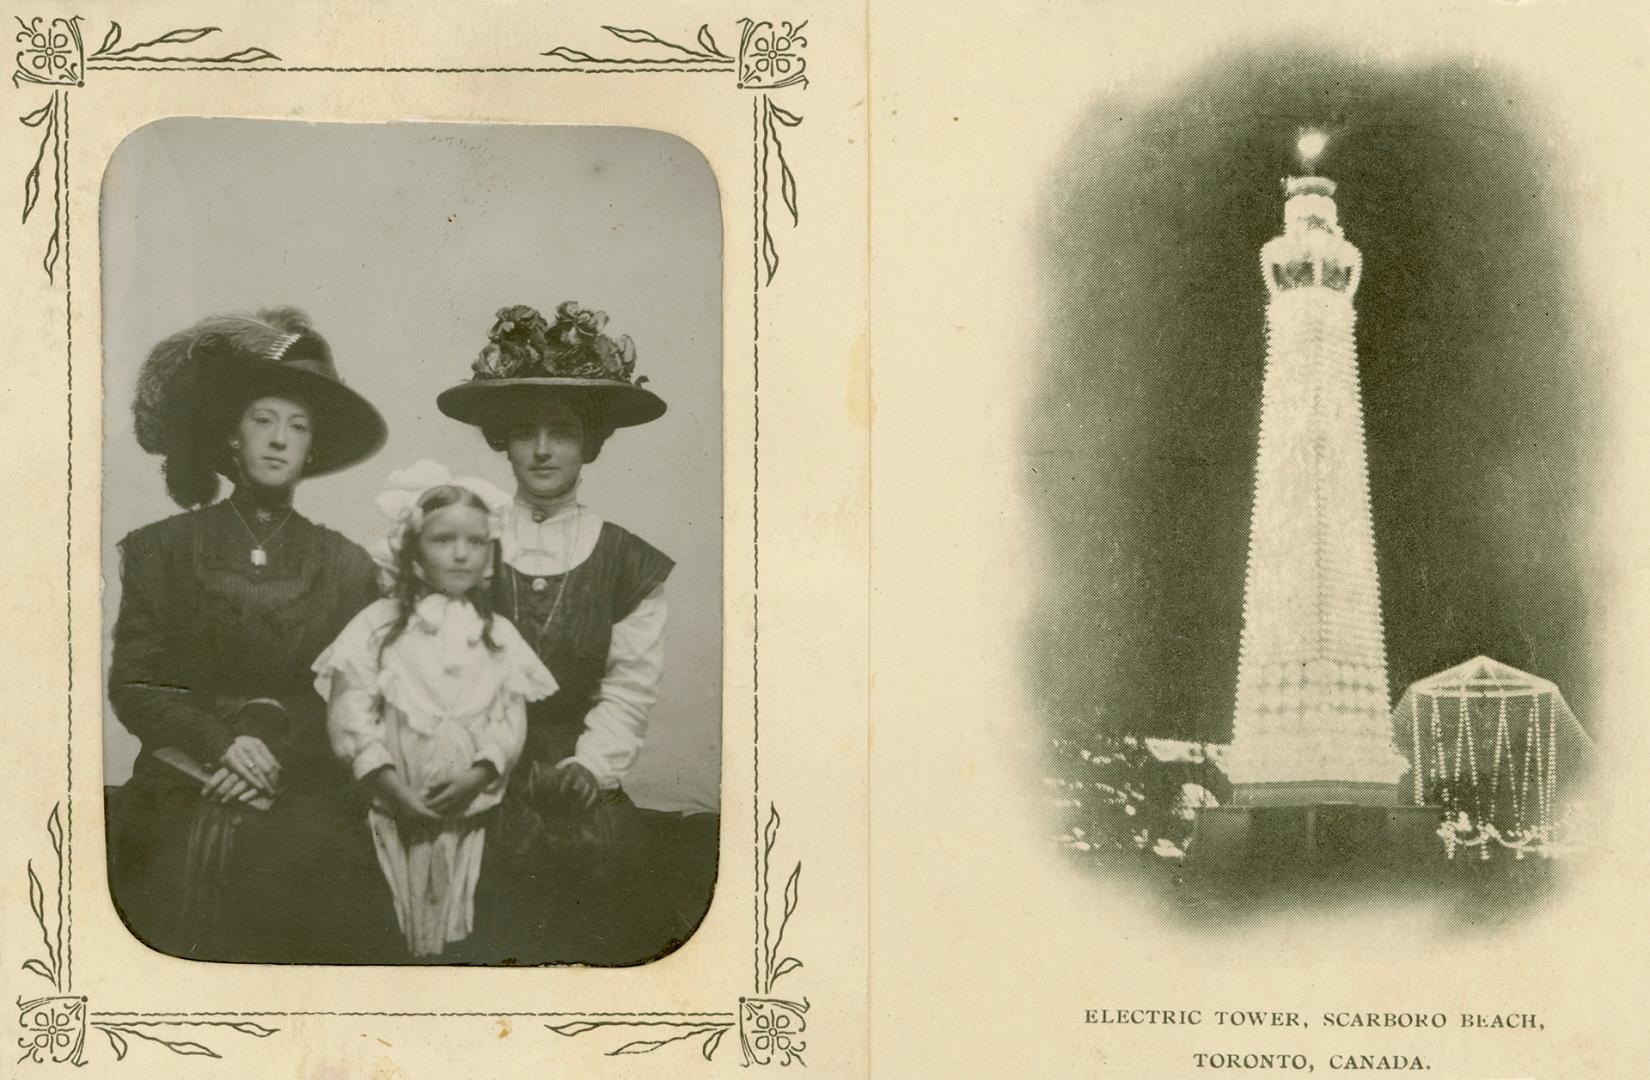 Two women and a child pose for a picture on the left and an illuminated tower is on the right.